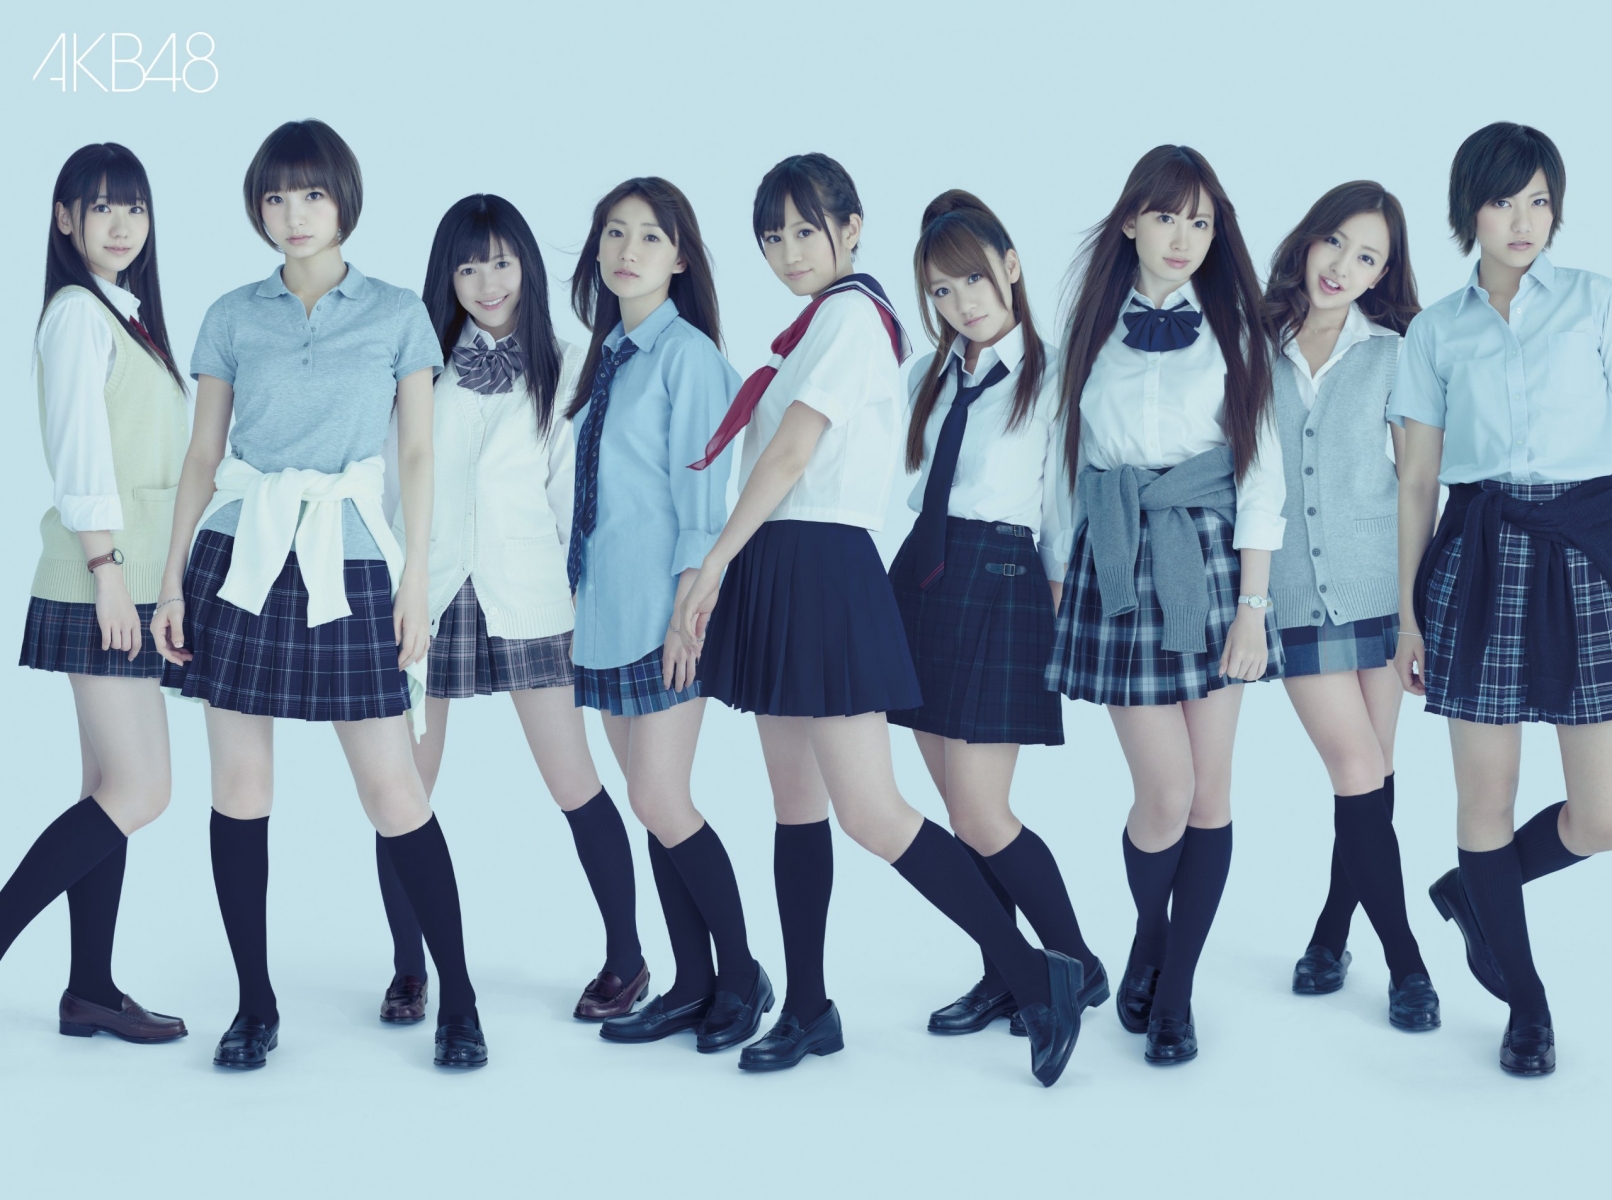 Everything you wanted to know about girls school uniforms in Japan SoraNews24 -Japan News- image